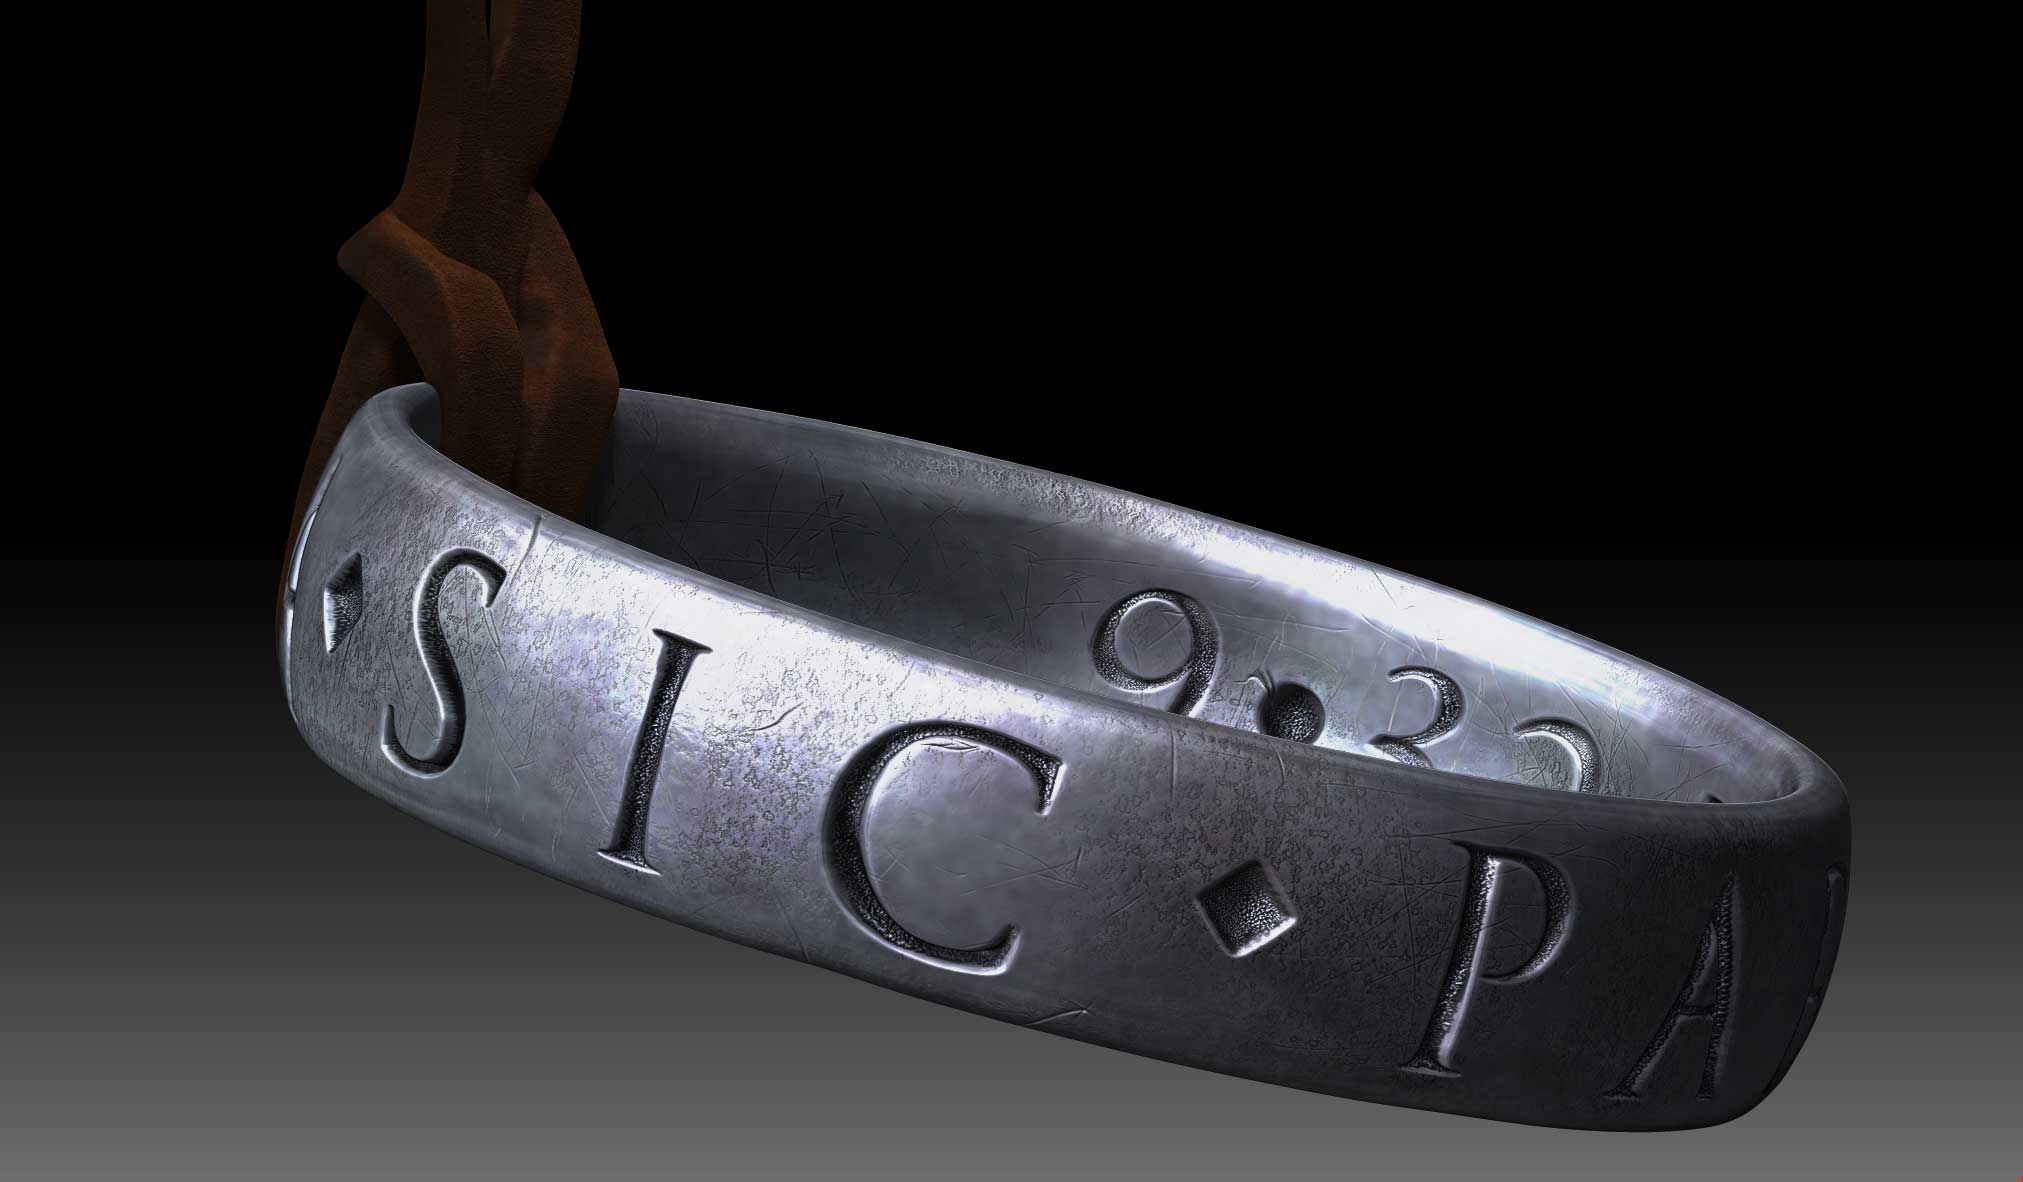 sic parvis magna ring from the uncharted steelbook : r/Steelbooks